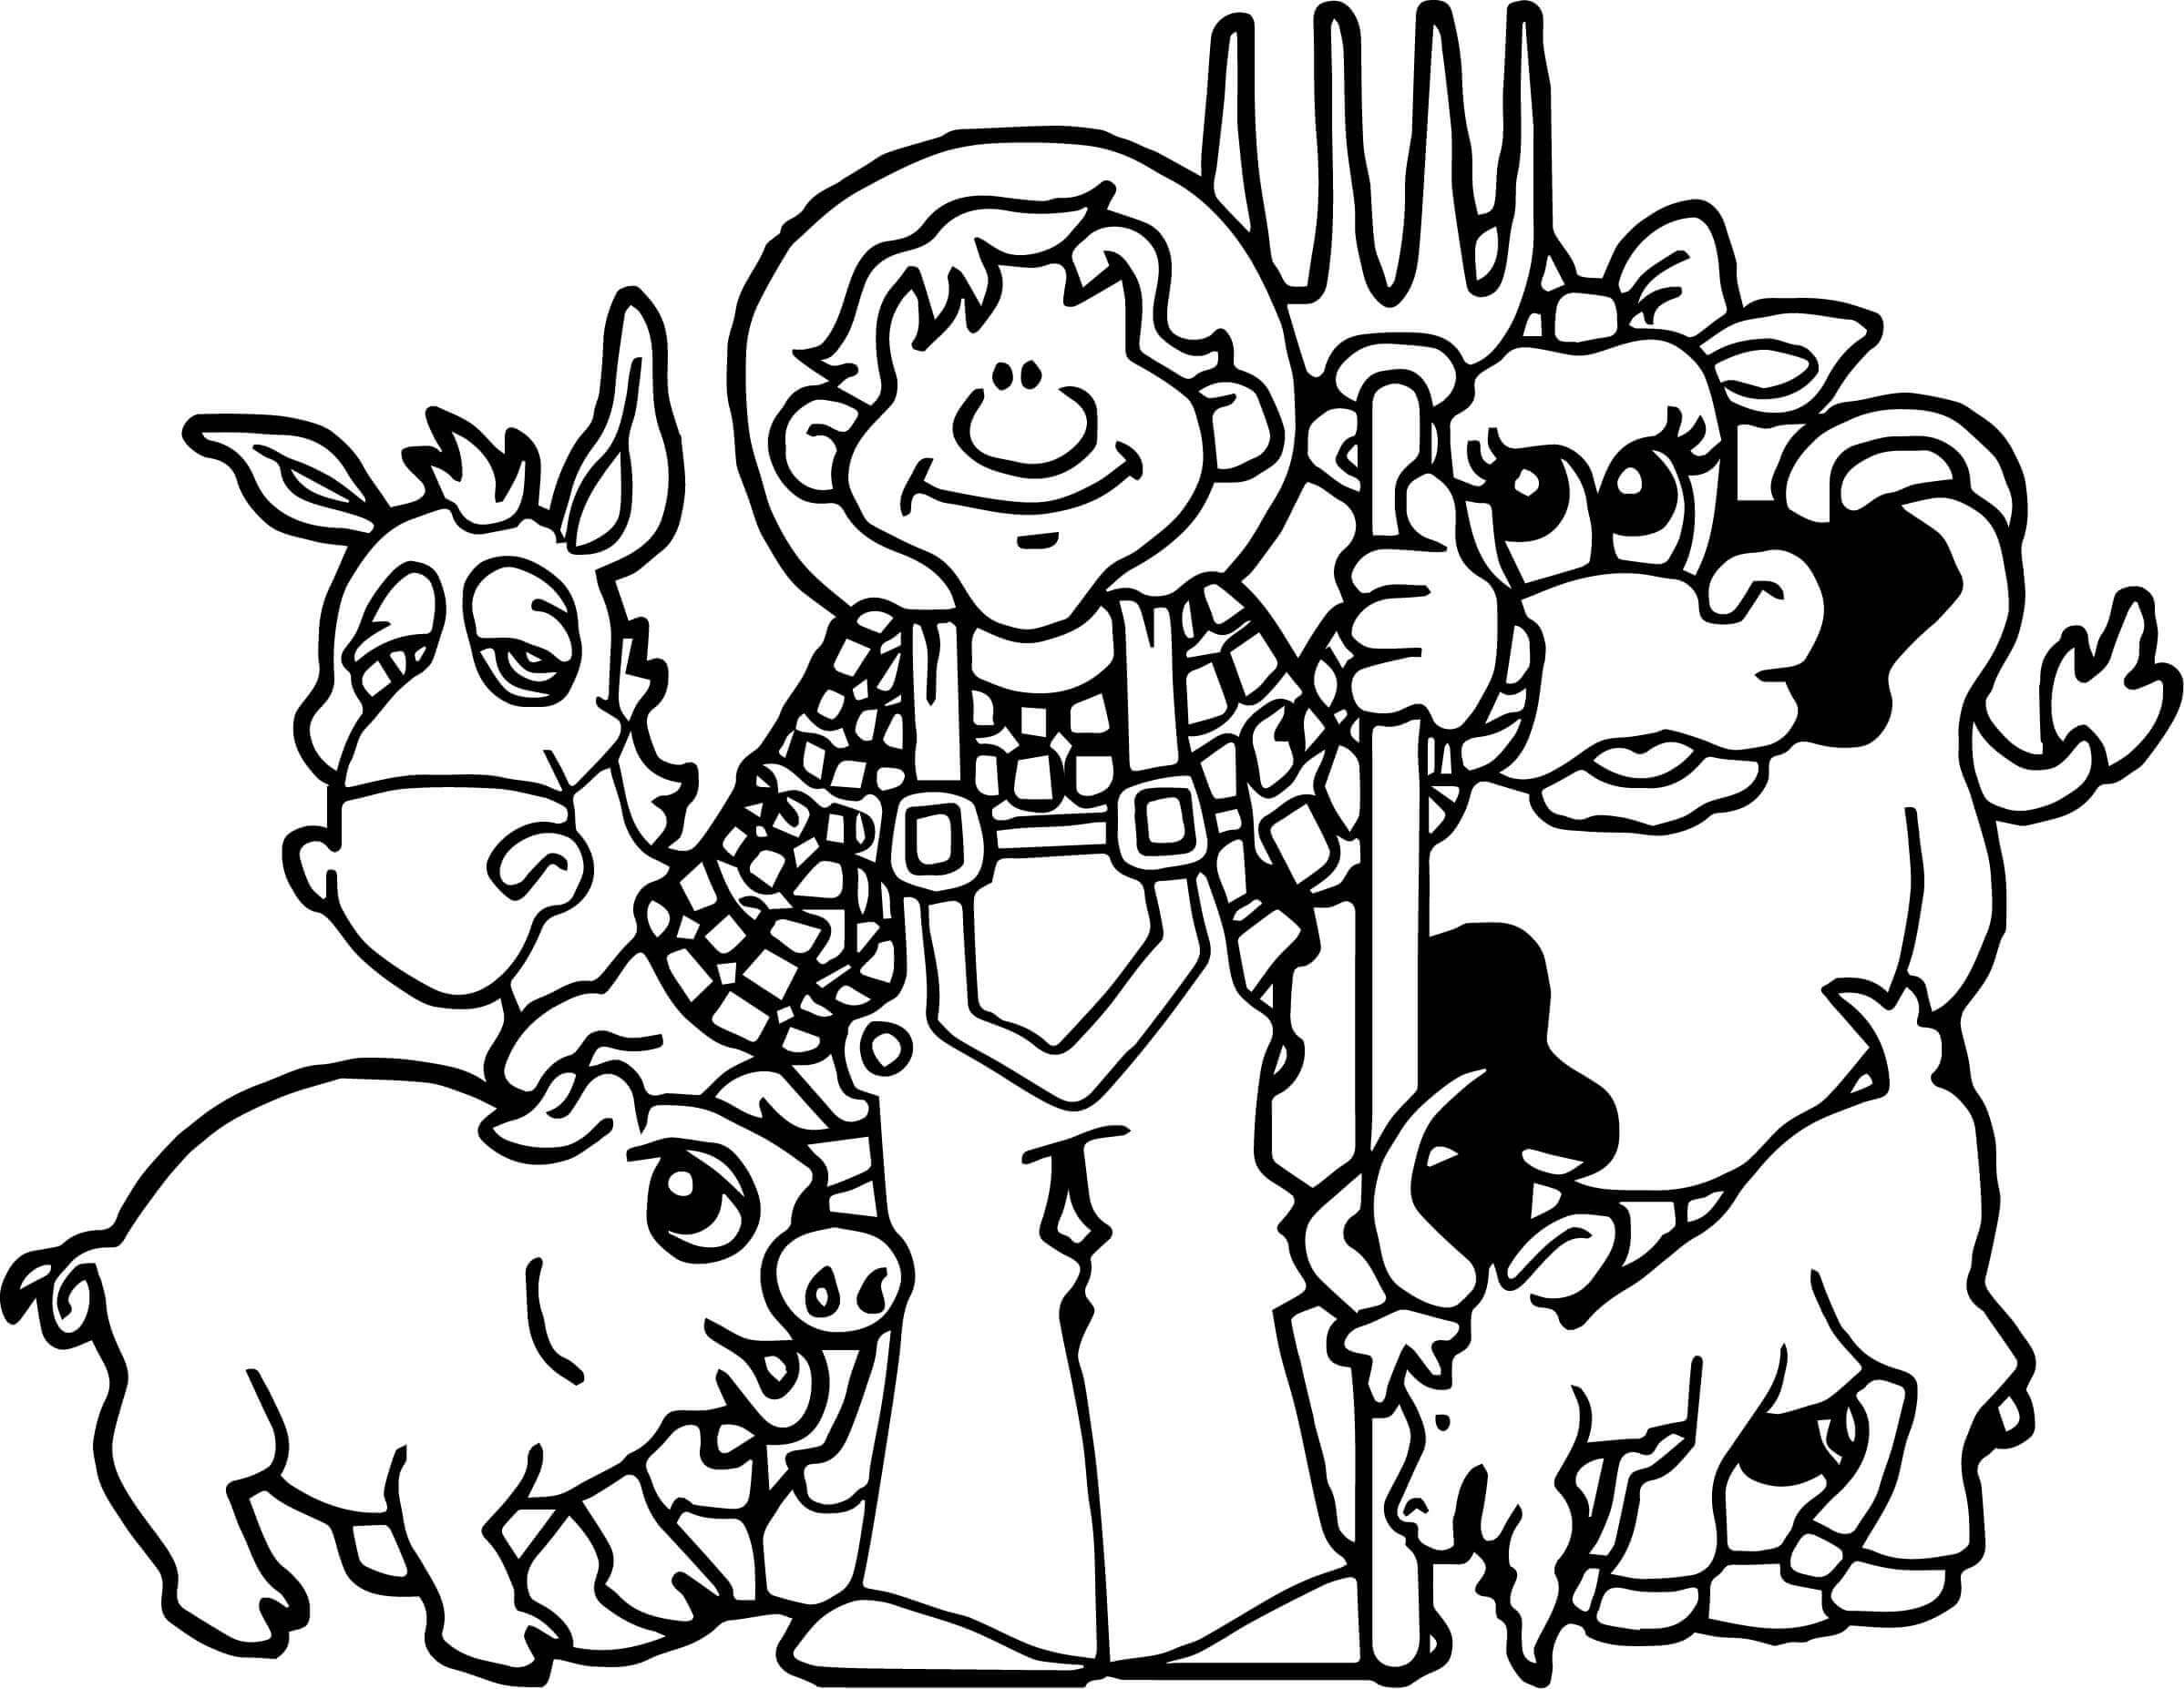 Farmer and His Animals Coloring Page